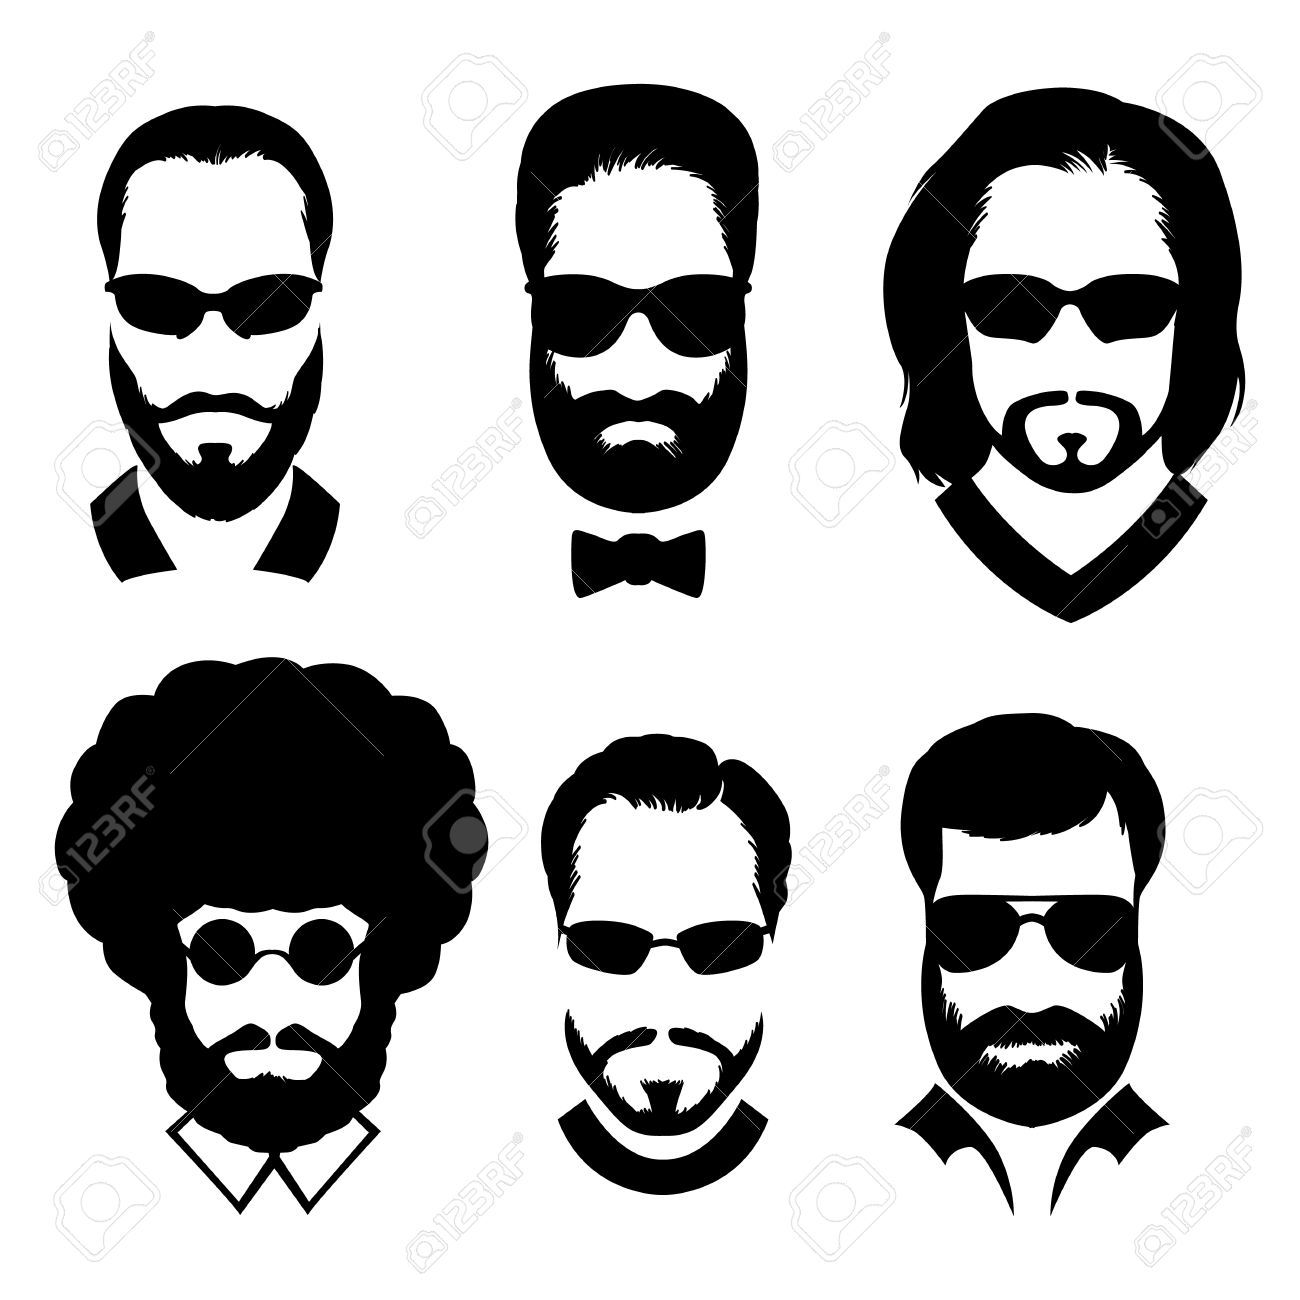 Image result for man with beard clipart in